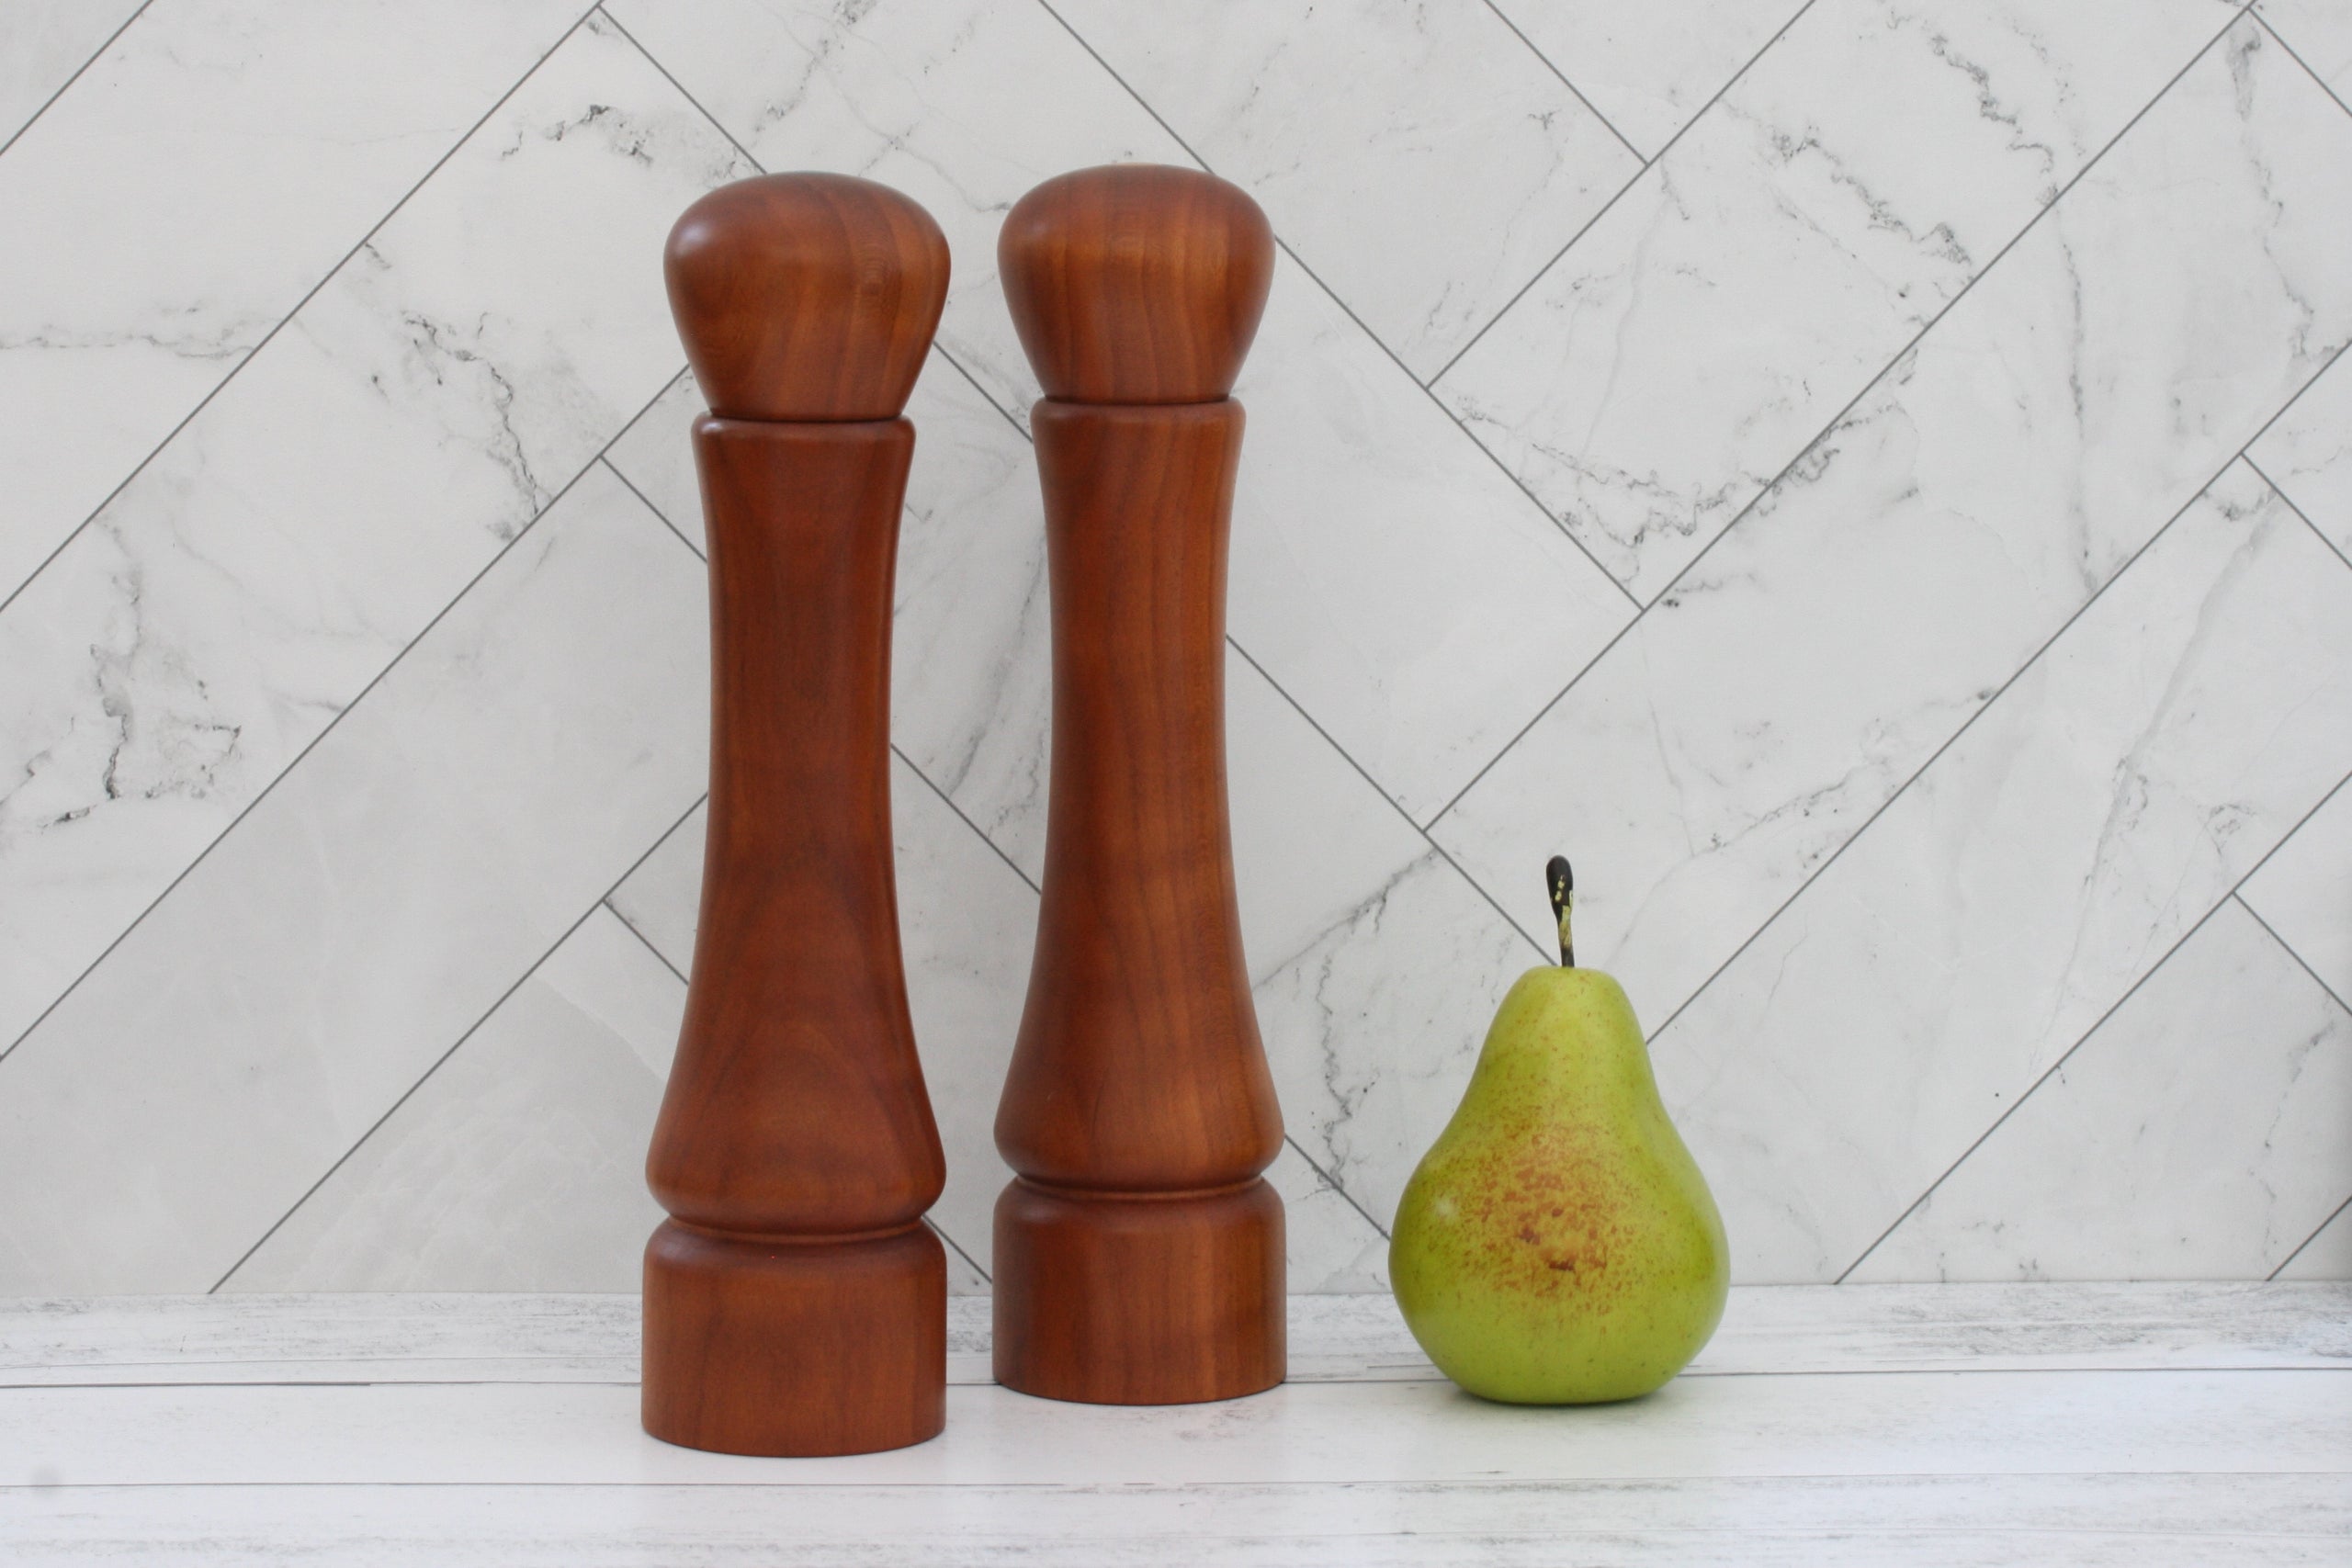 Cherry wood large salt and pepper grinders with ceramic grinders.